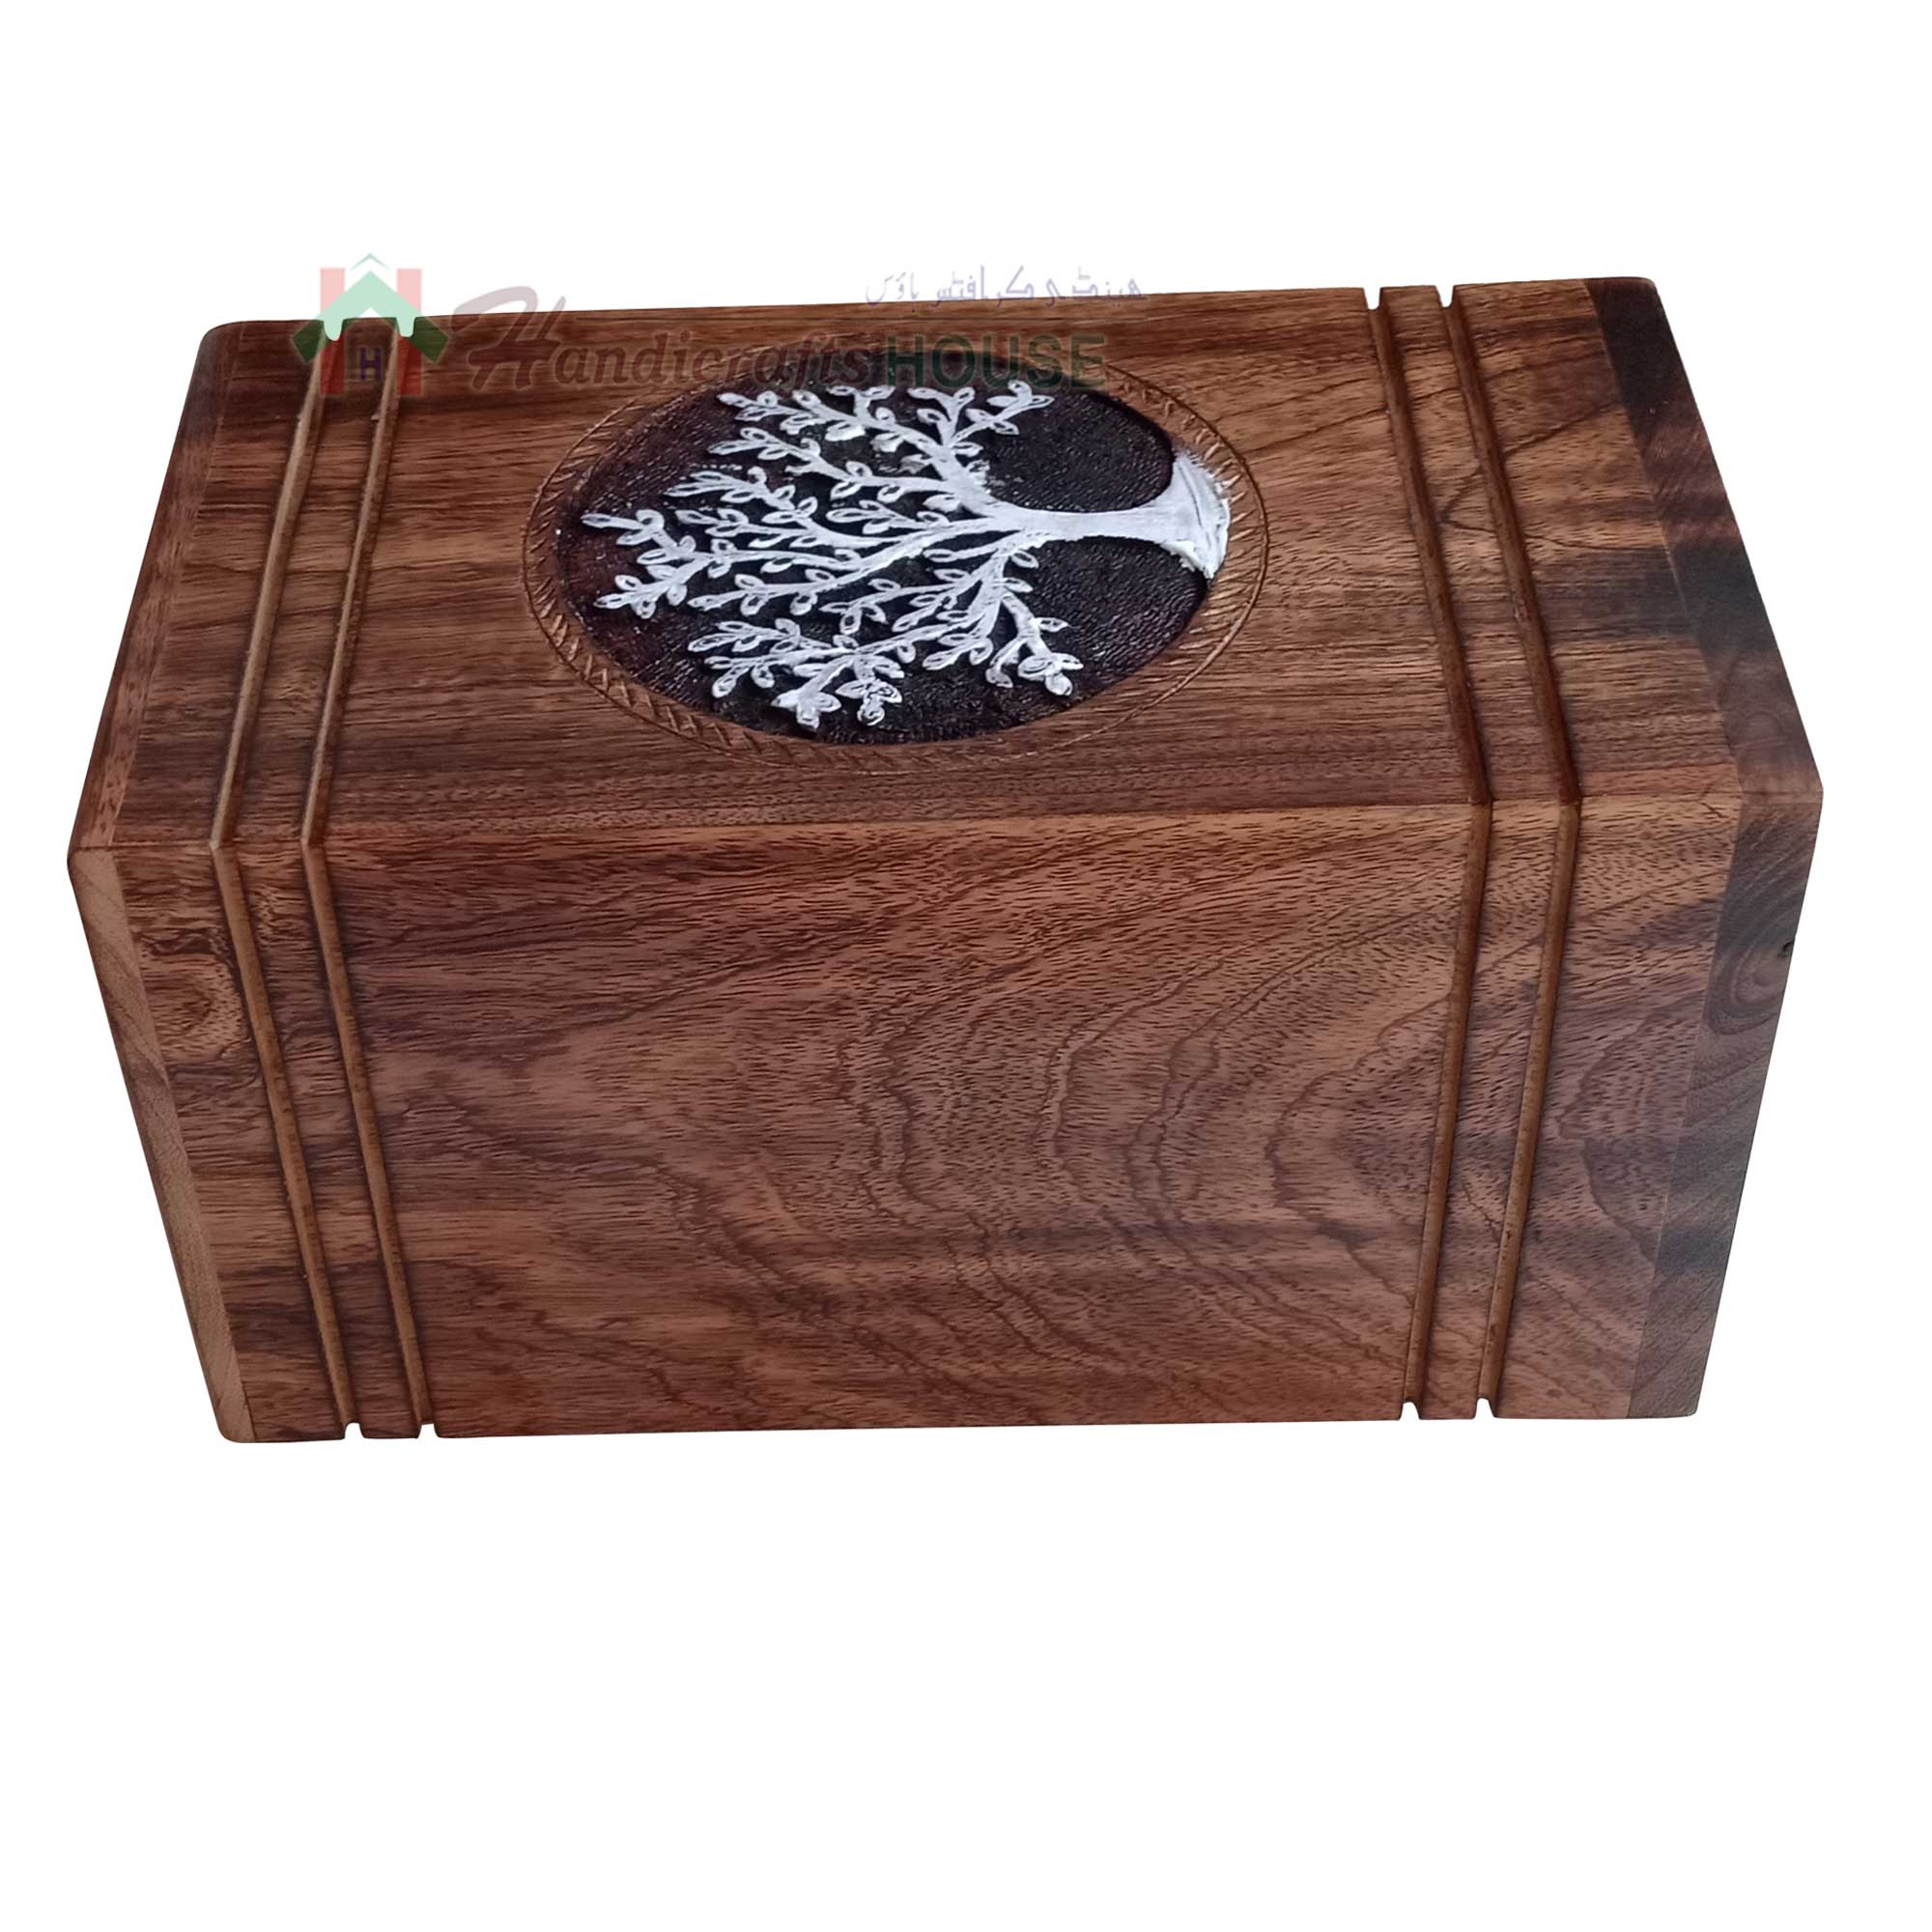 Unique Wooden Cremation Urn for Ashes Modern Burial White Tree Of Life Adult Urn 